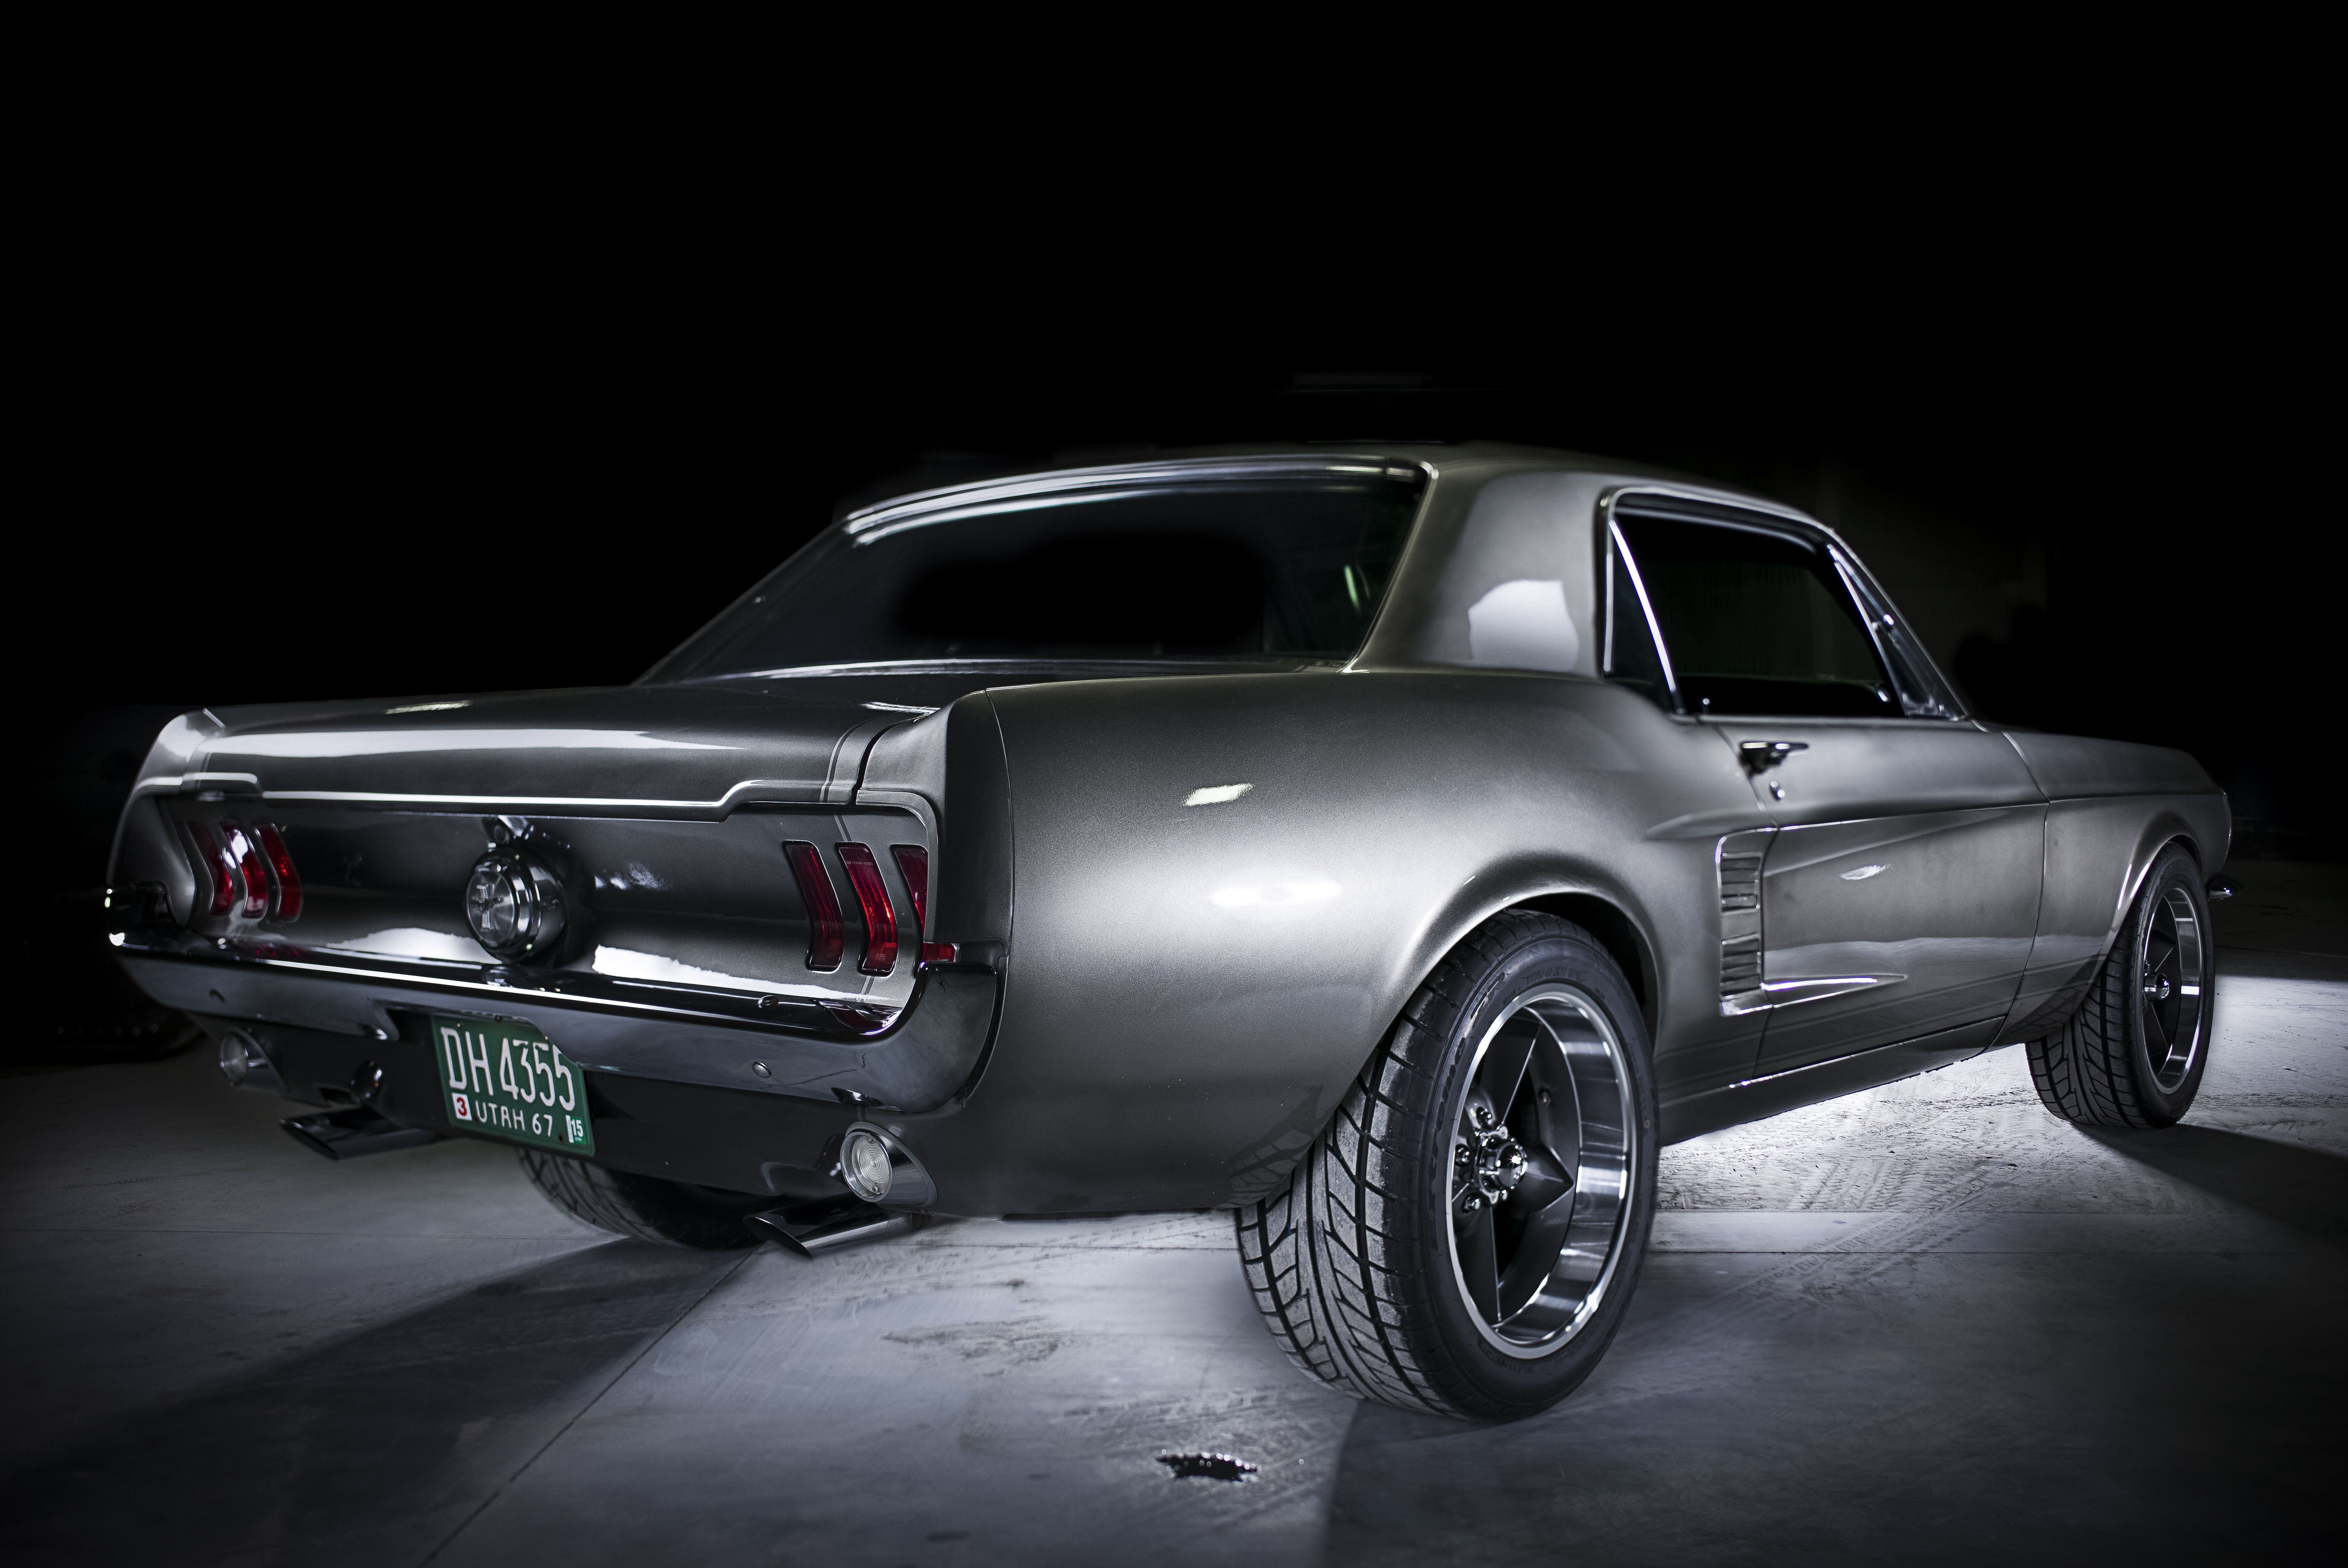 Your Ridiculously Awesome 1967 Ford Mustang Wallpaper Is Here